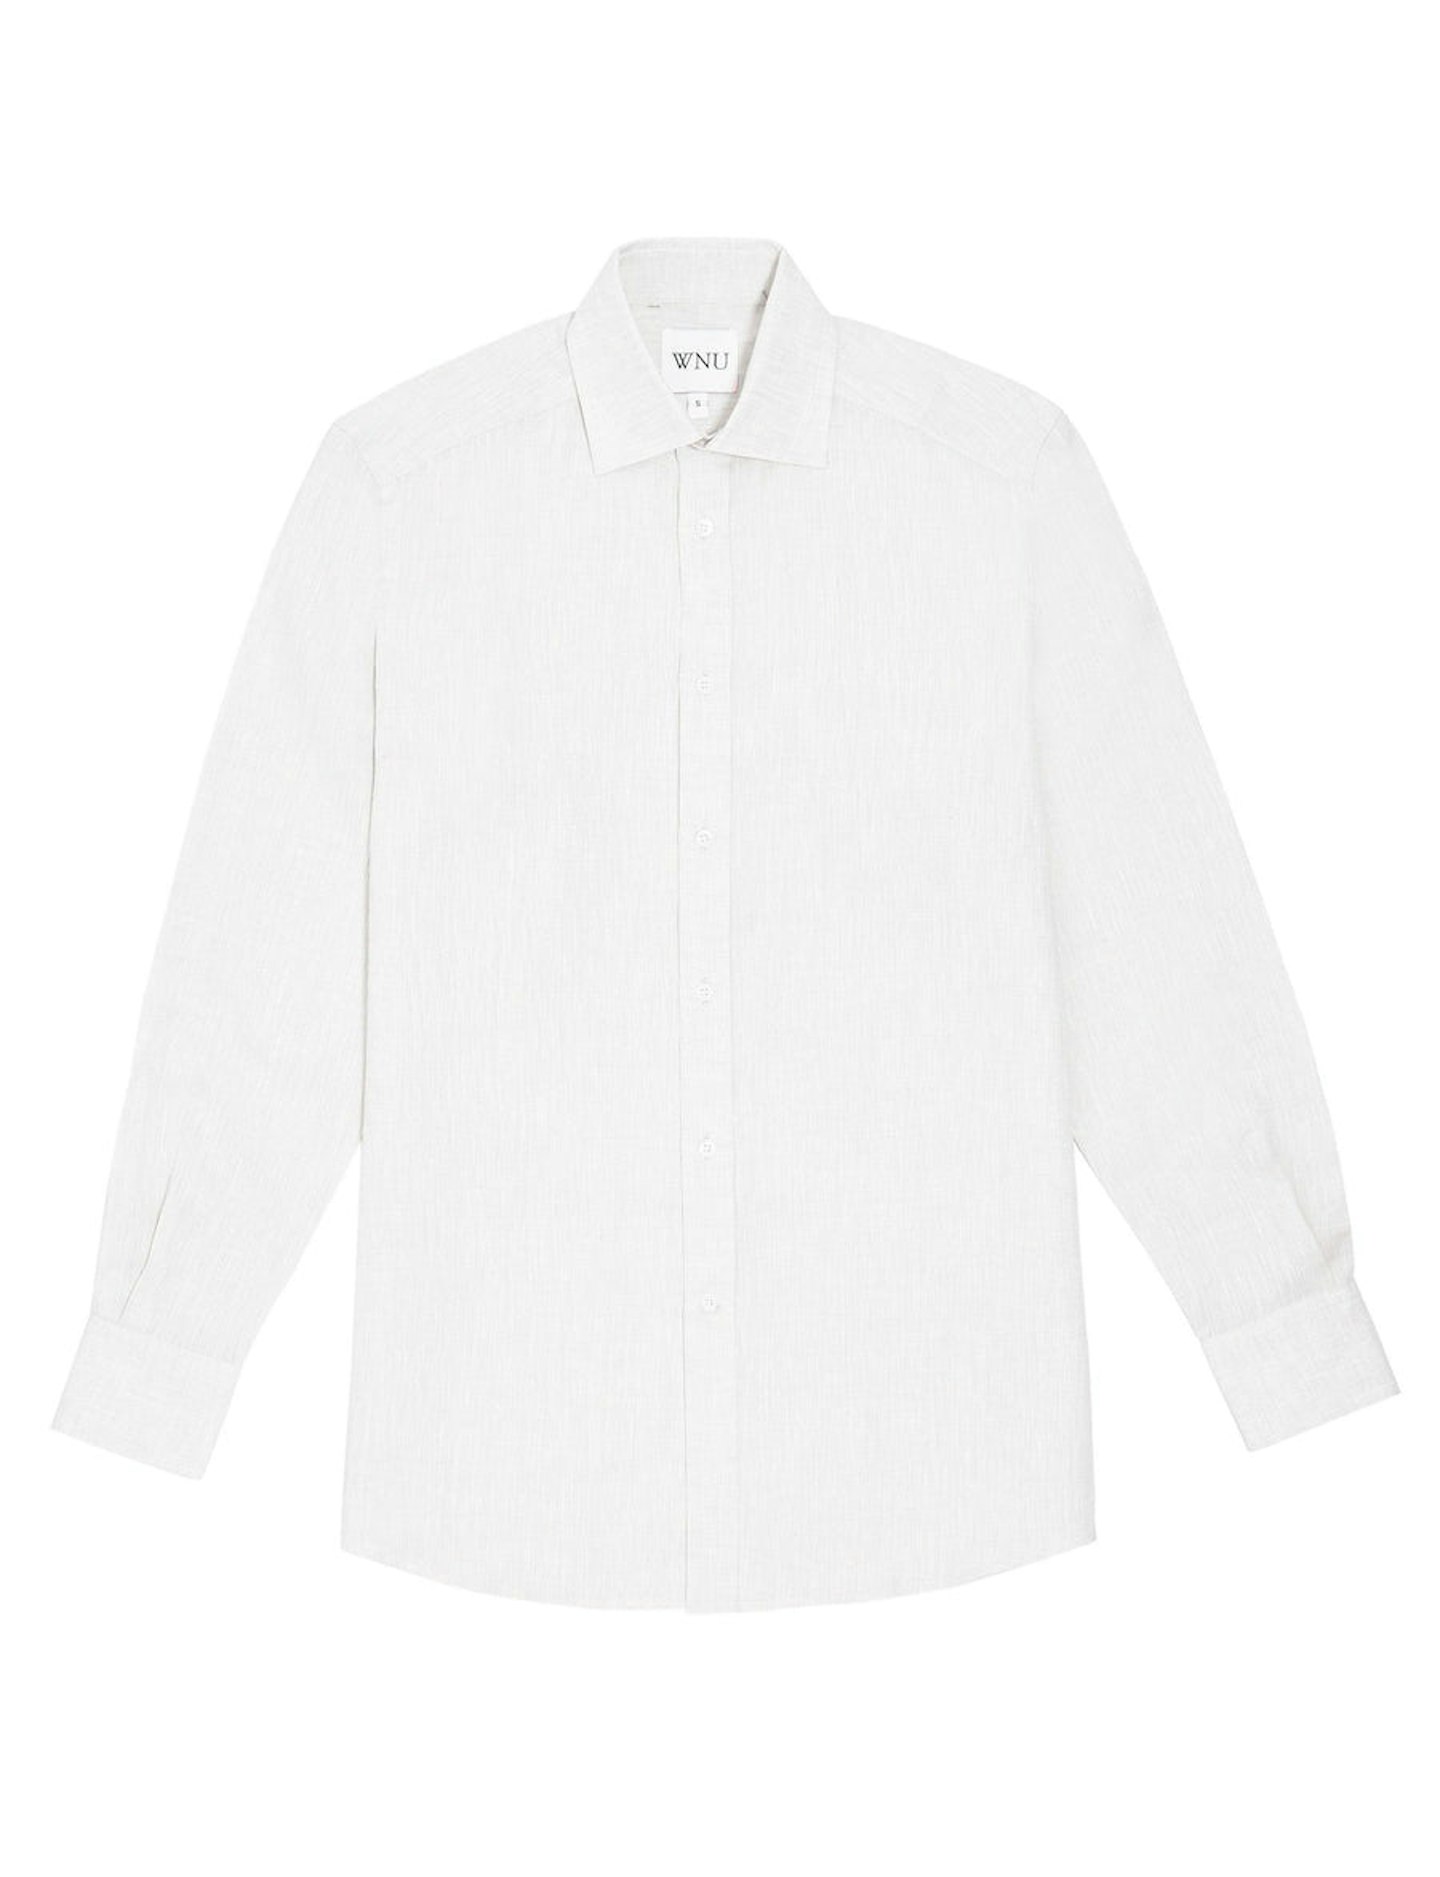 With Nothing Underneath, The Boyfriend Shirt Linen